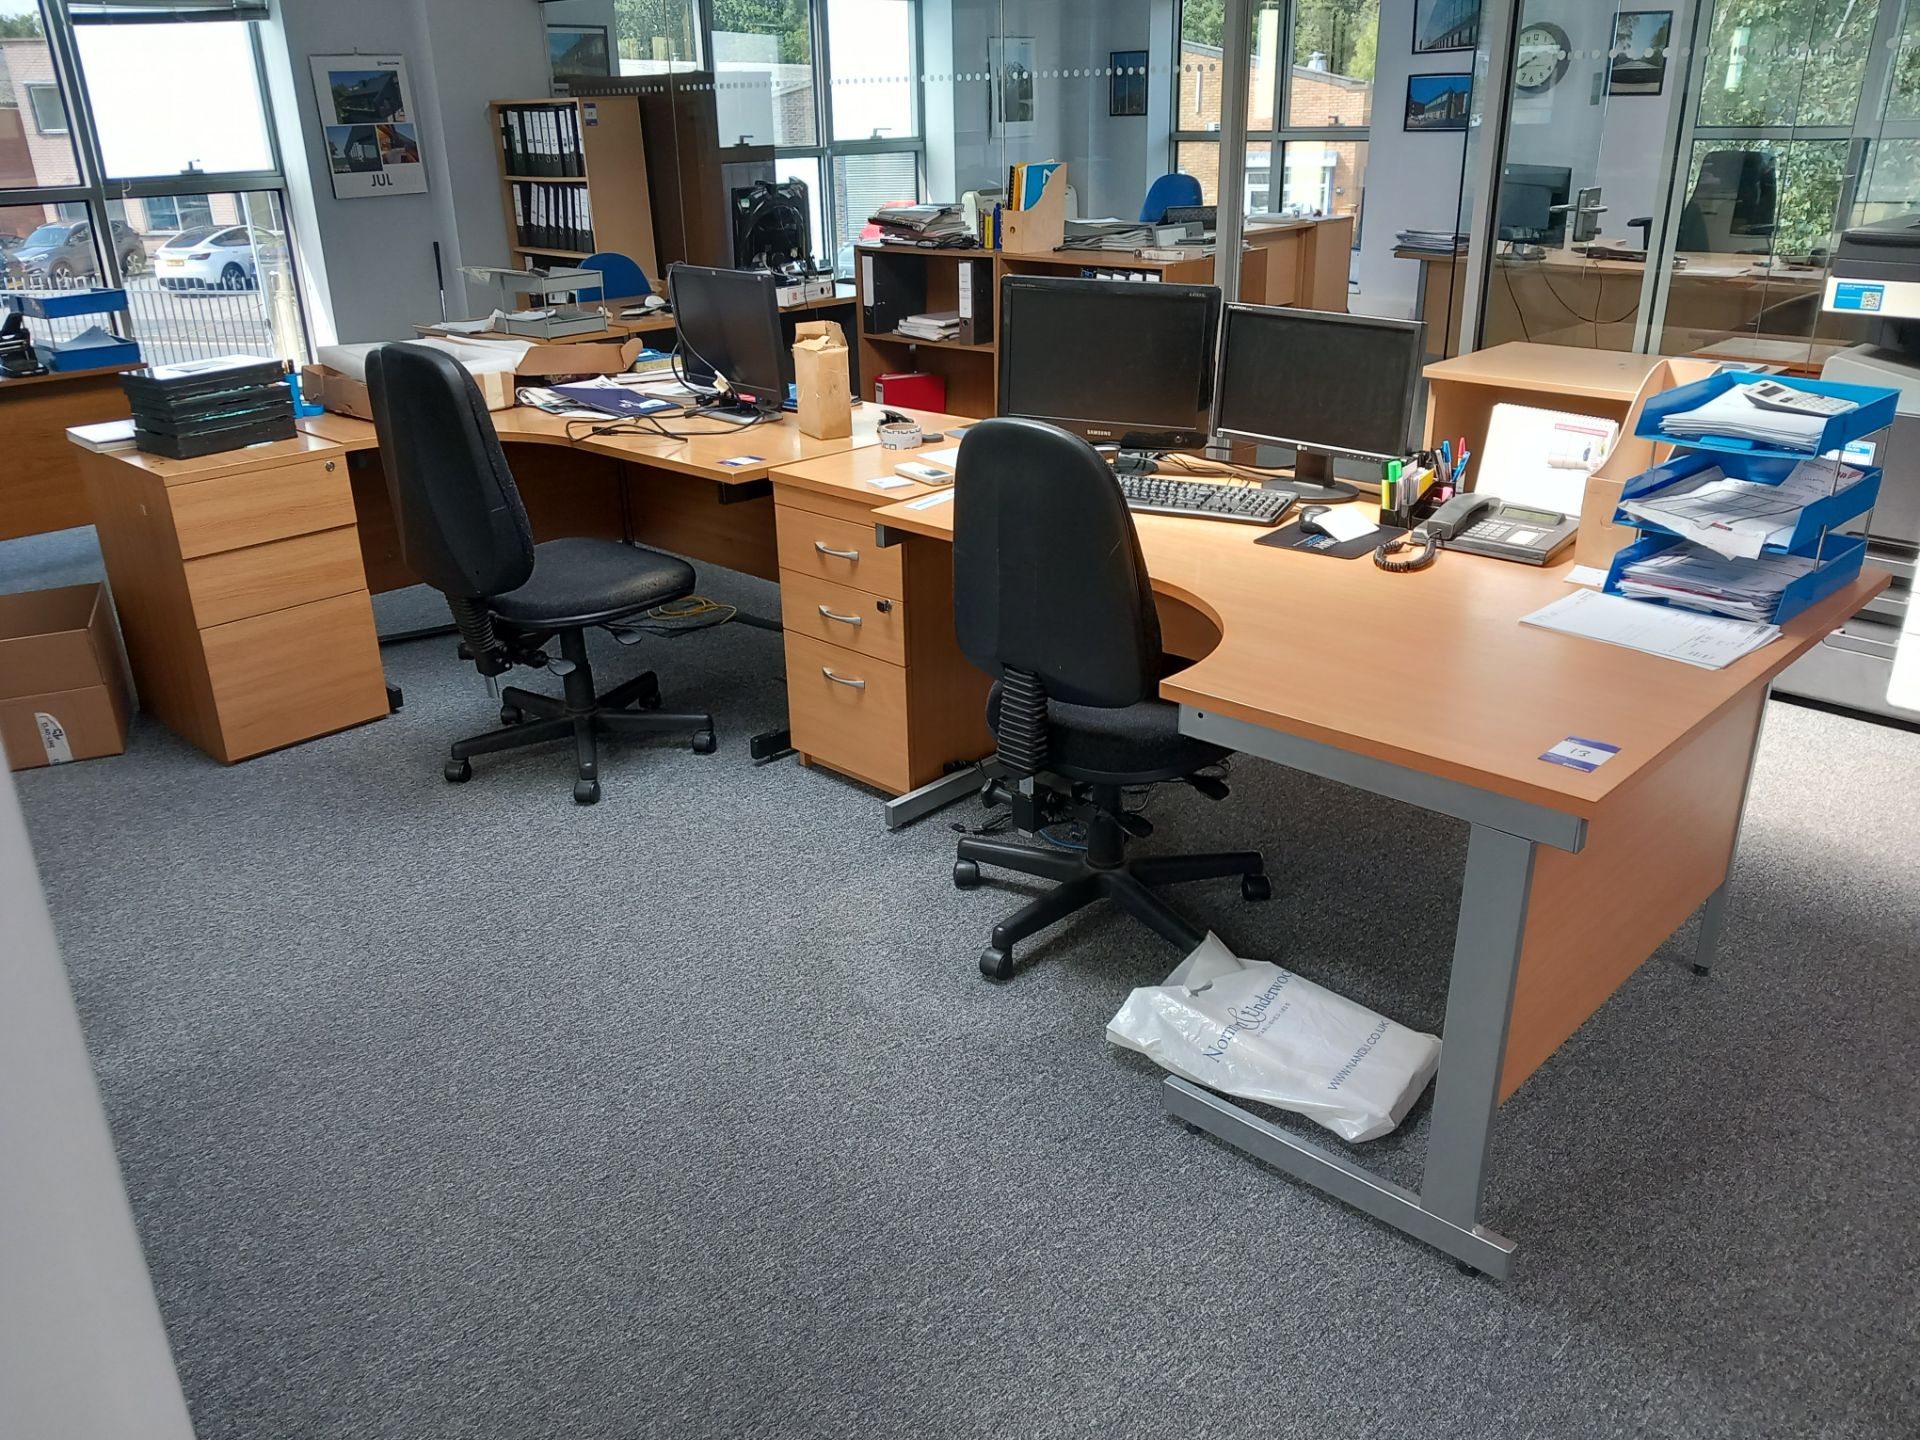 2 x Workstations to include 2 x curved single person cantilever desks, 2 x drawers, 2 x office